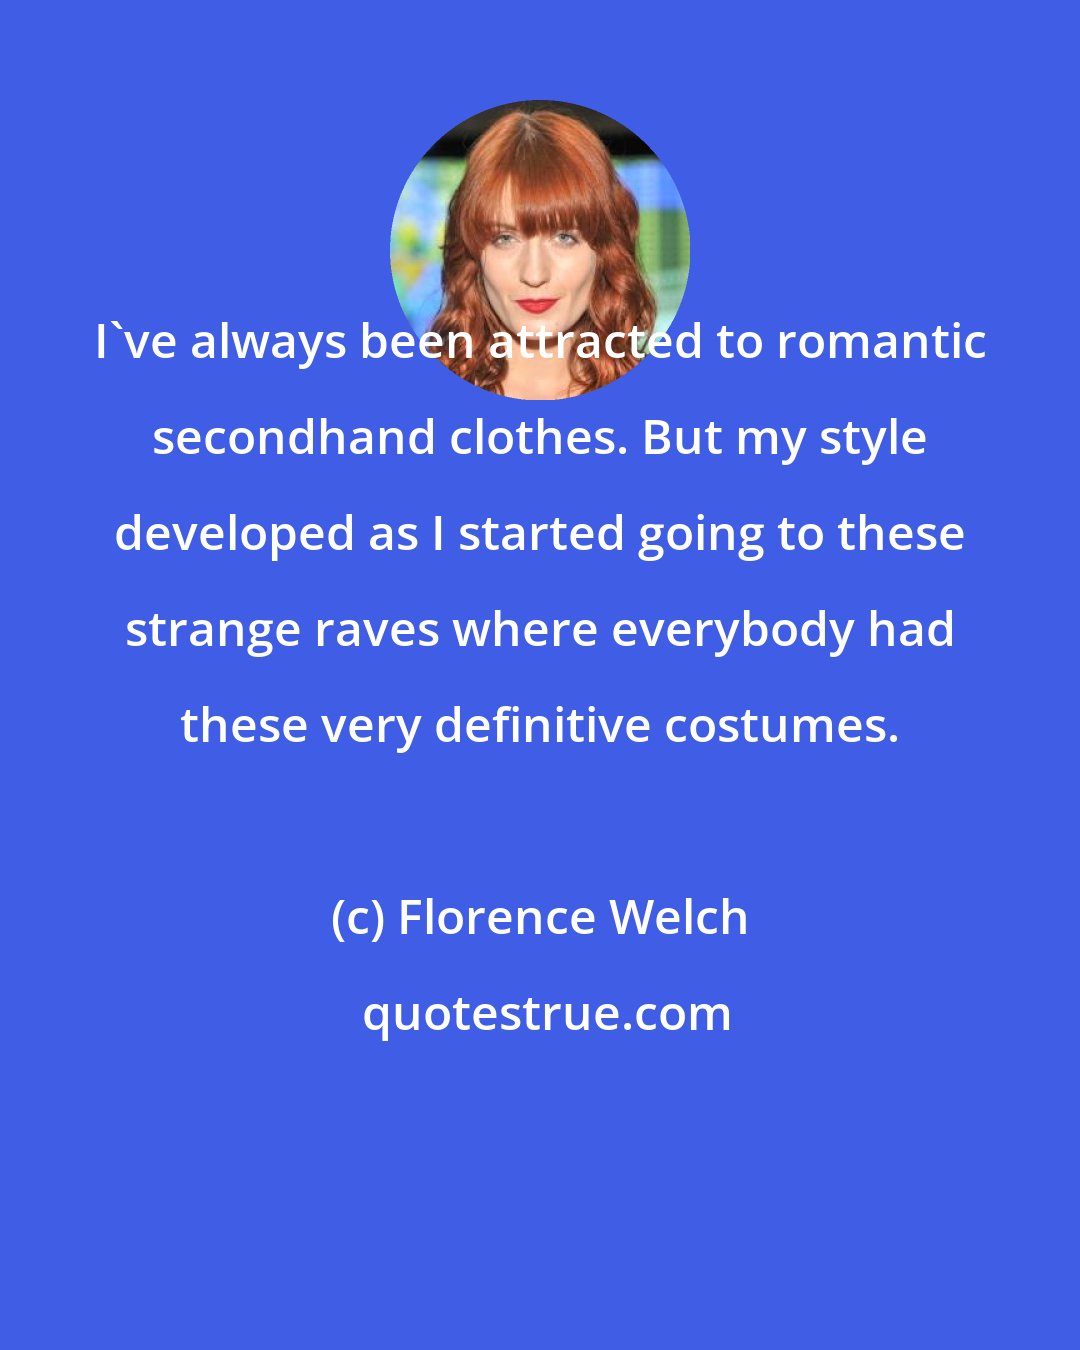 Florence Welch: I've always been attracted to romantic secondhand clothes. But my style developed as I started going to these strange raves where everybody had these very definitive costumes.